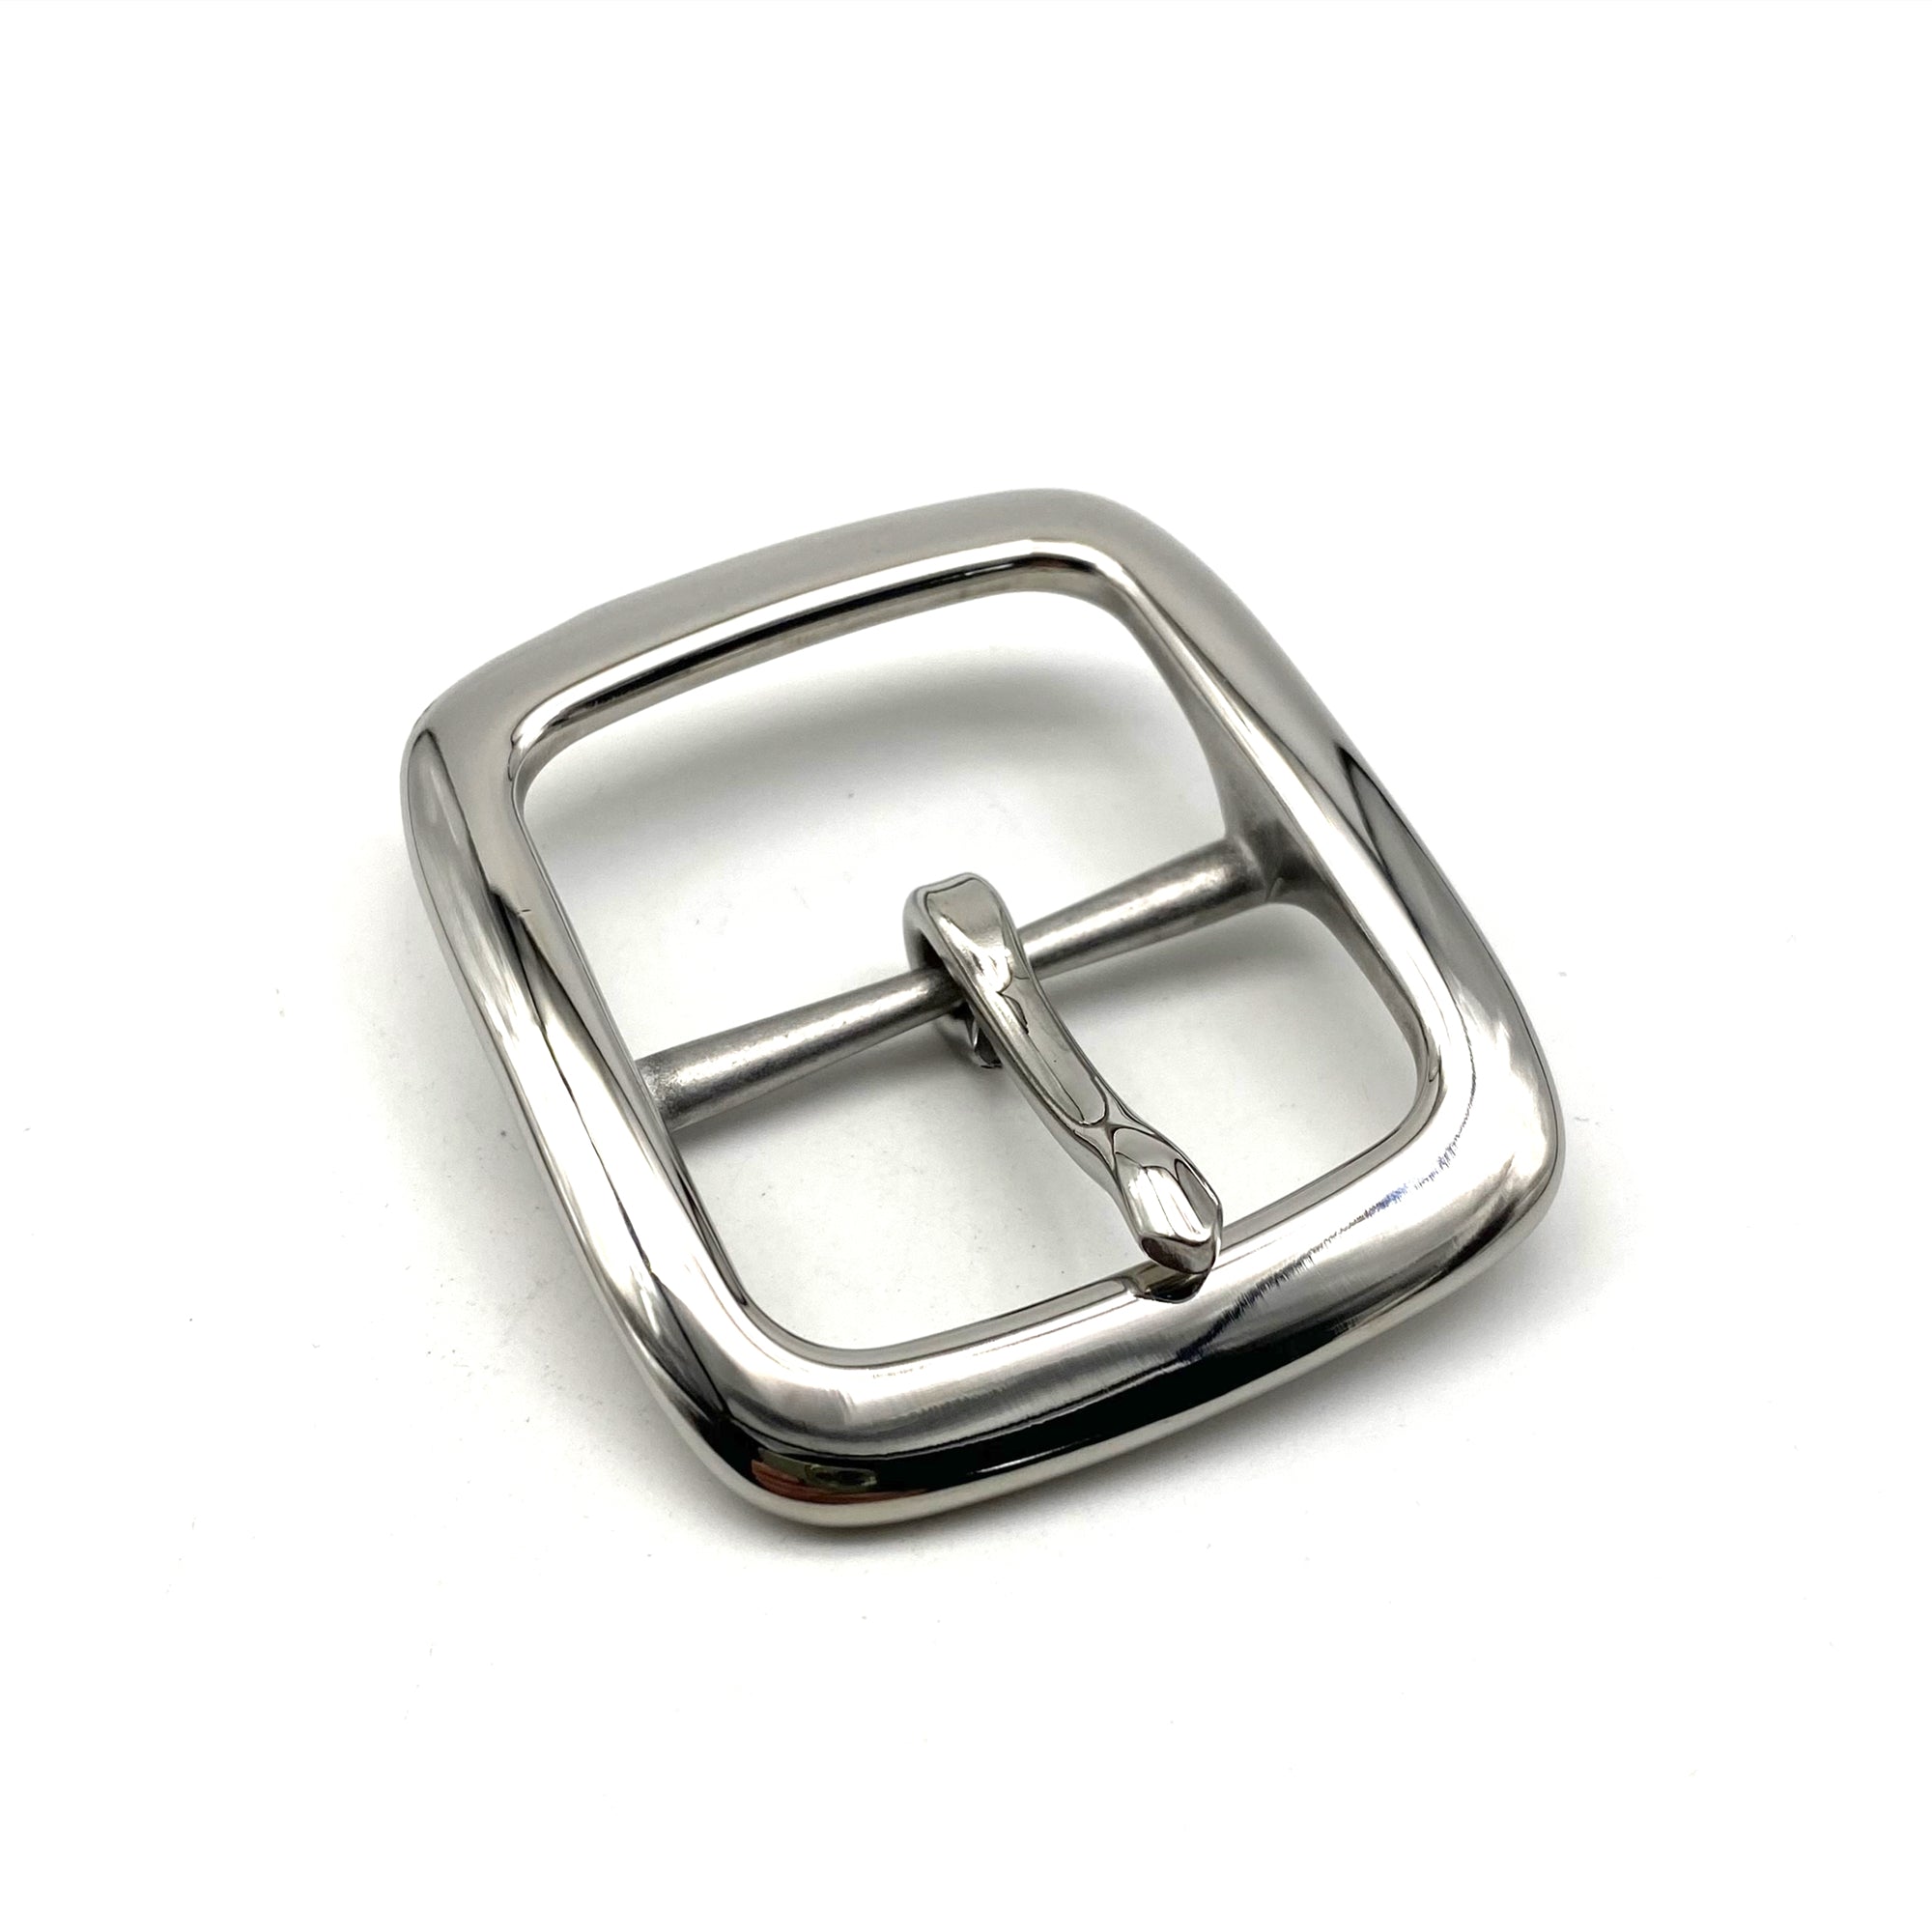 Solid Stainless Buckle 42mm Leather Belt Buckles